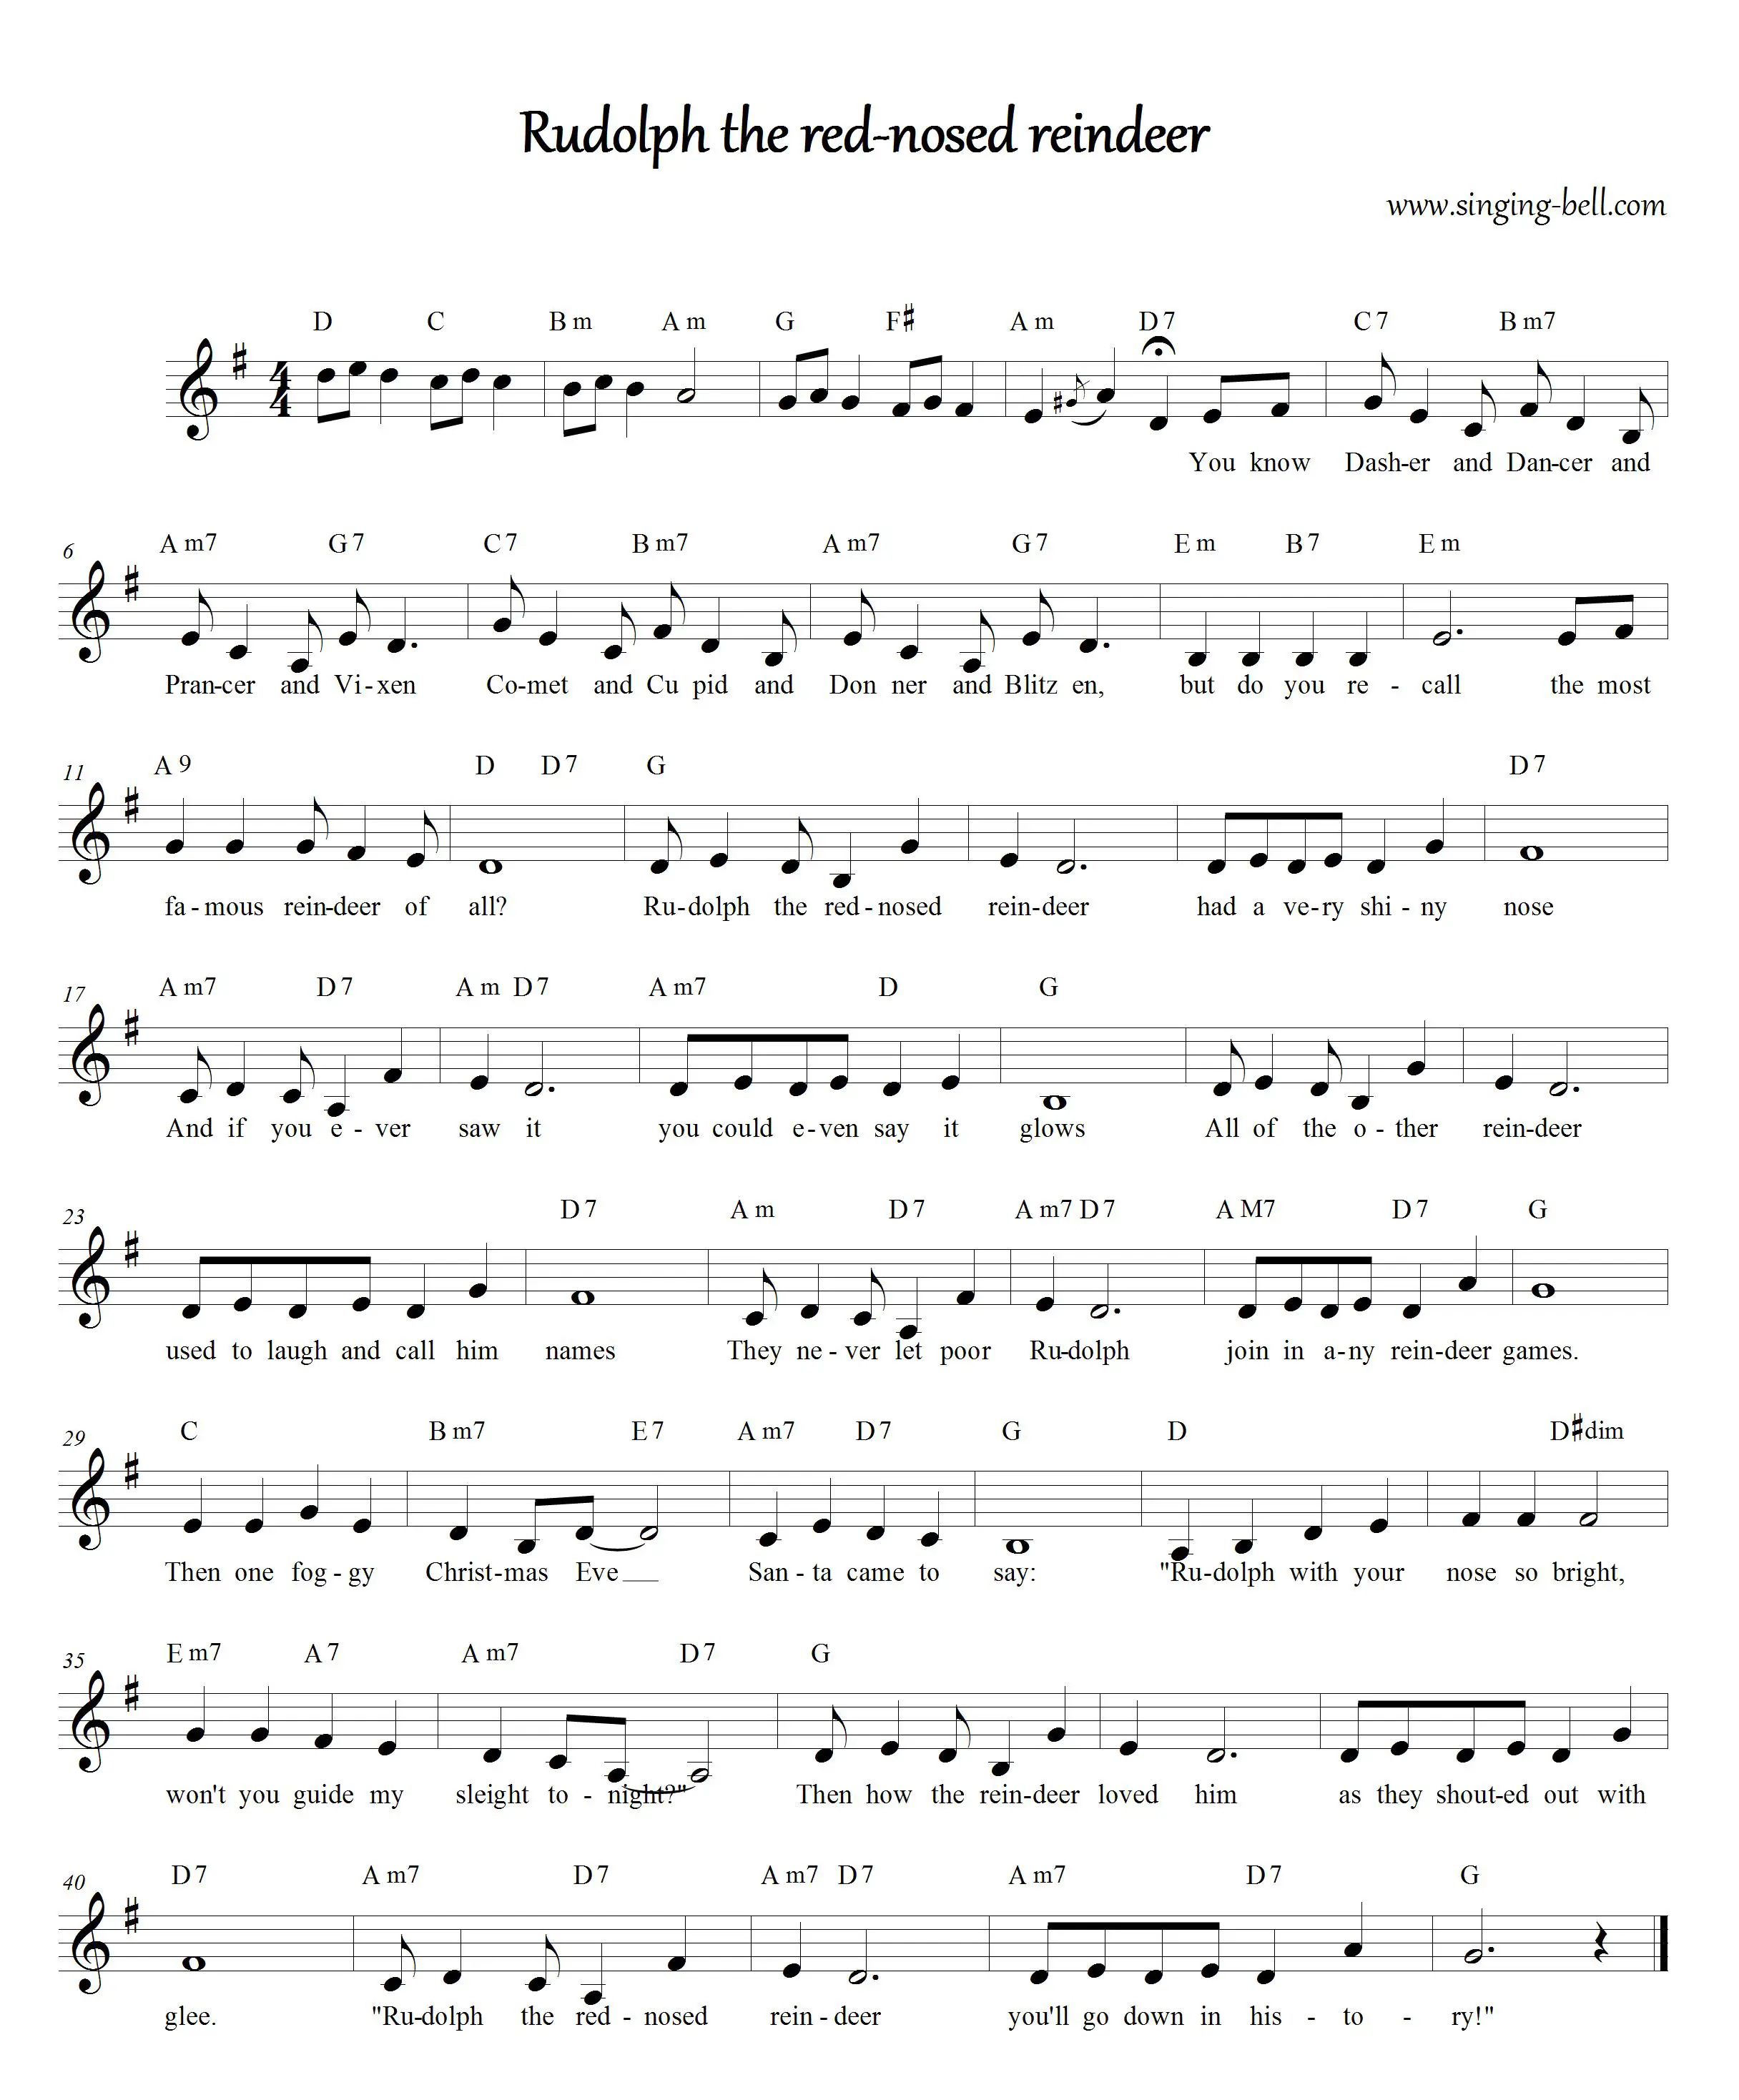 Rudolph, the red-nosed reindeer - Free Christmas sheet music download in D